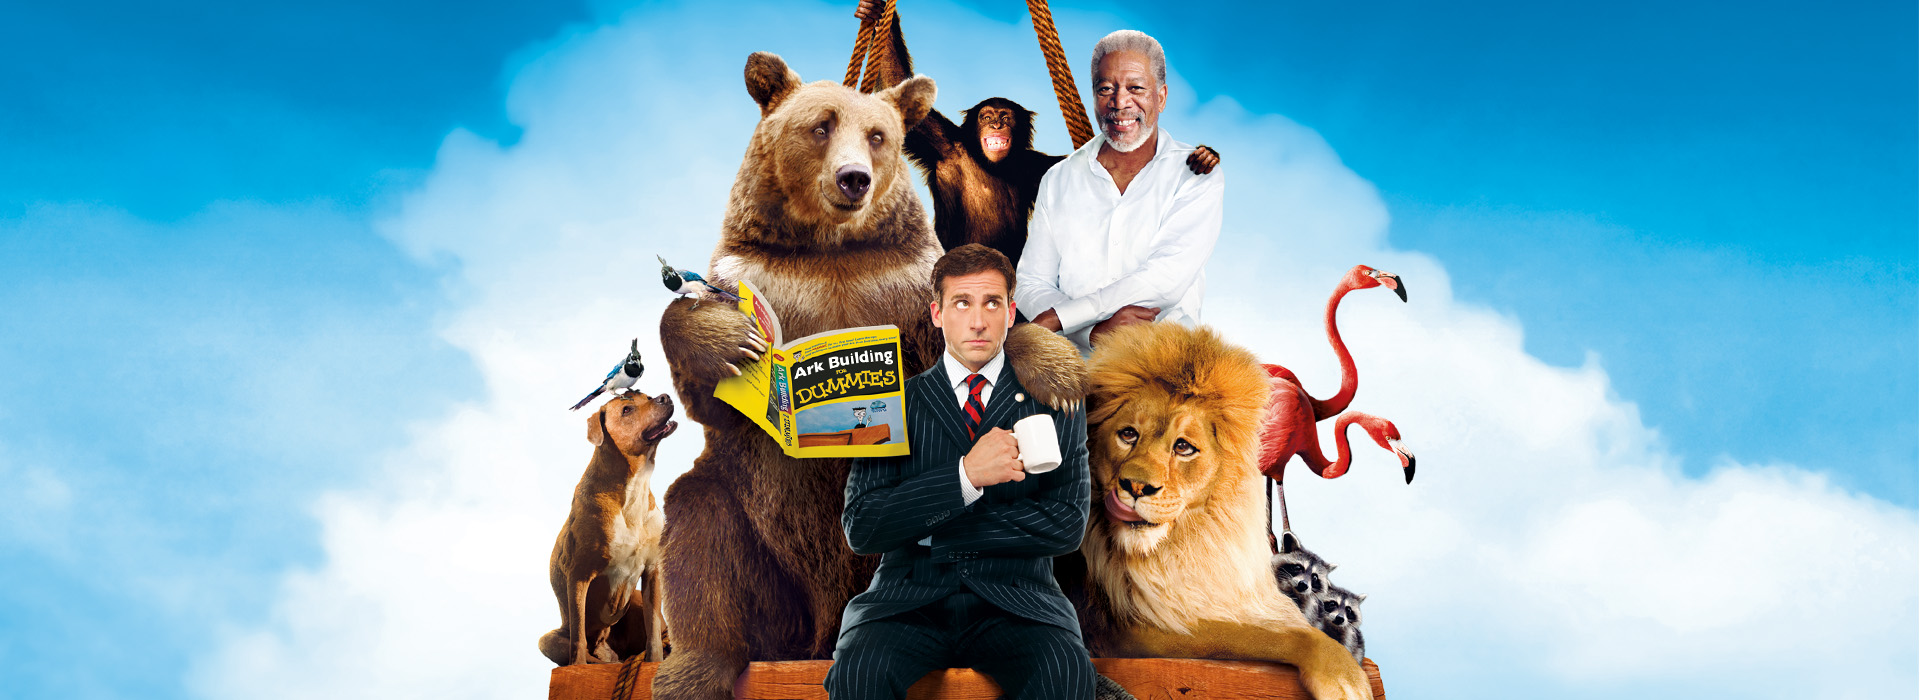 Movie poster Evan Almighty